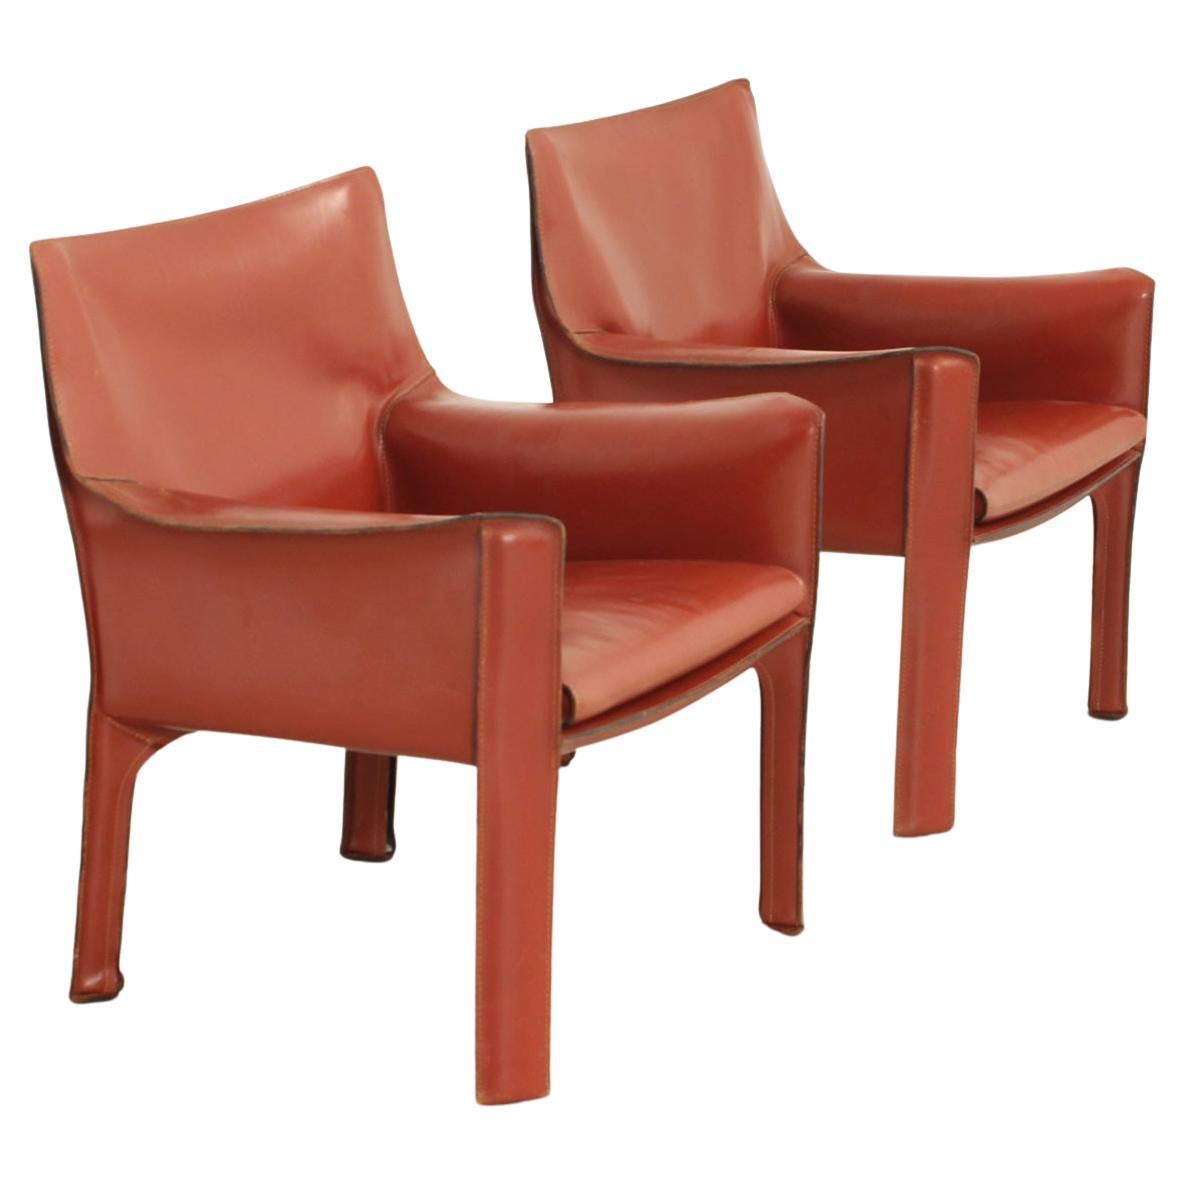 Pair of Cab 414 Armchairs by Mario Bellini for Cassina